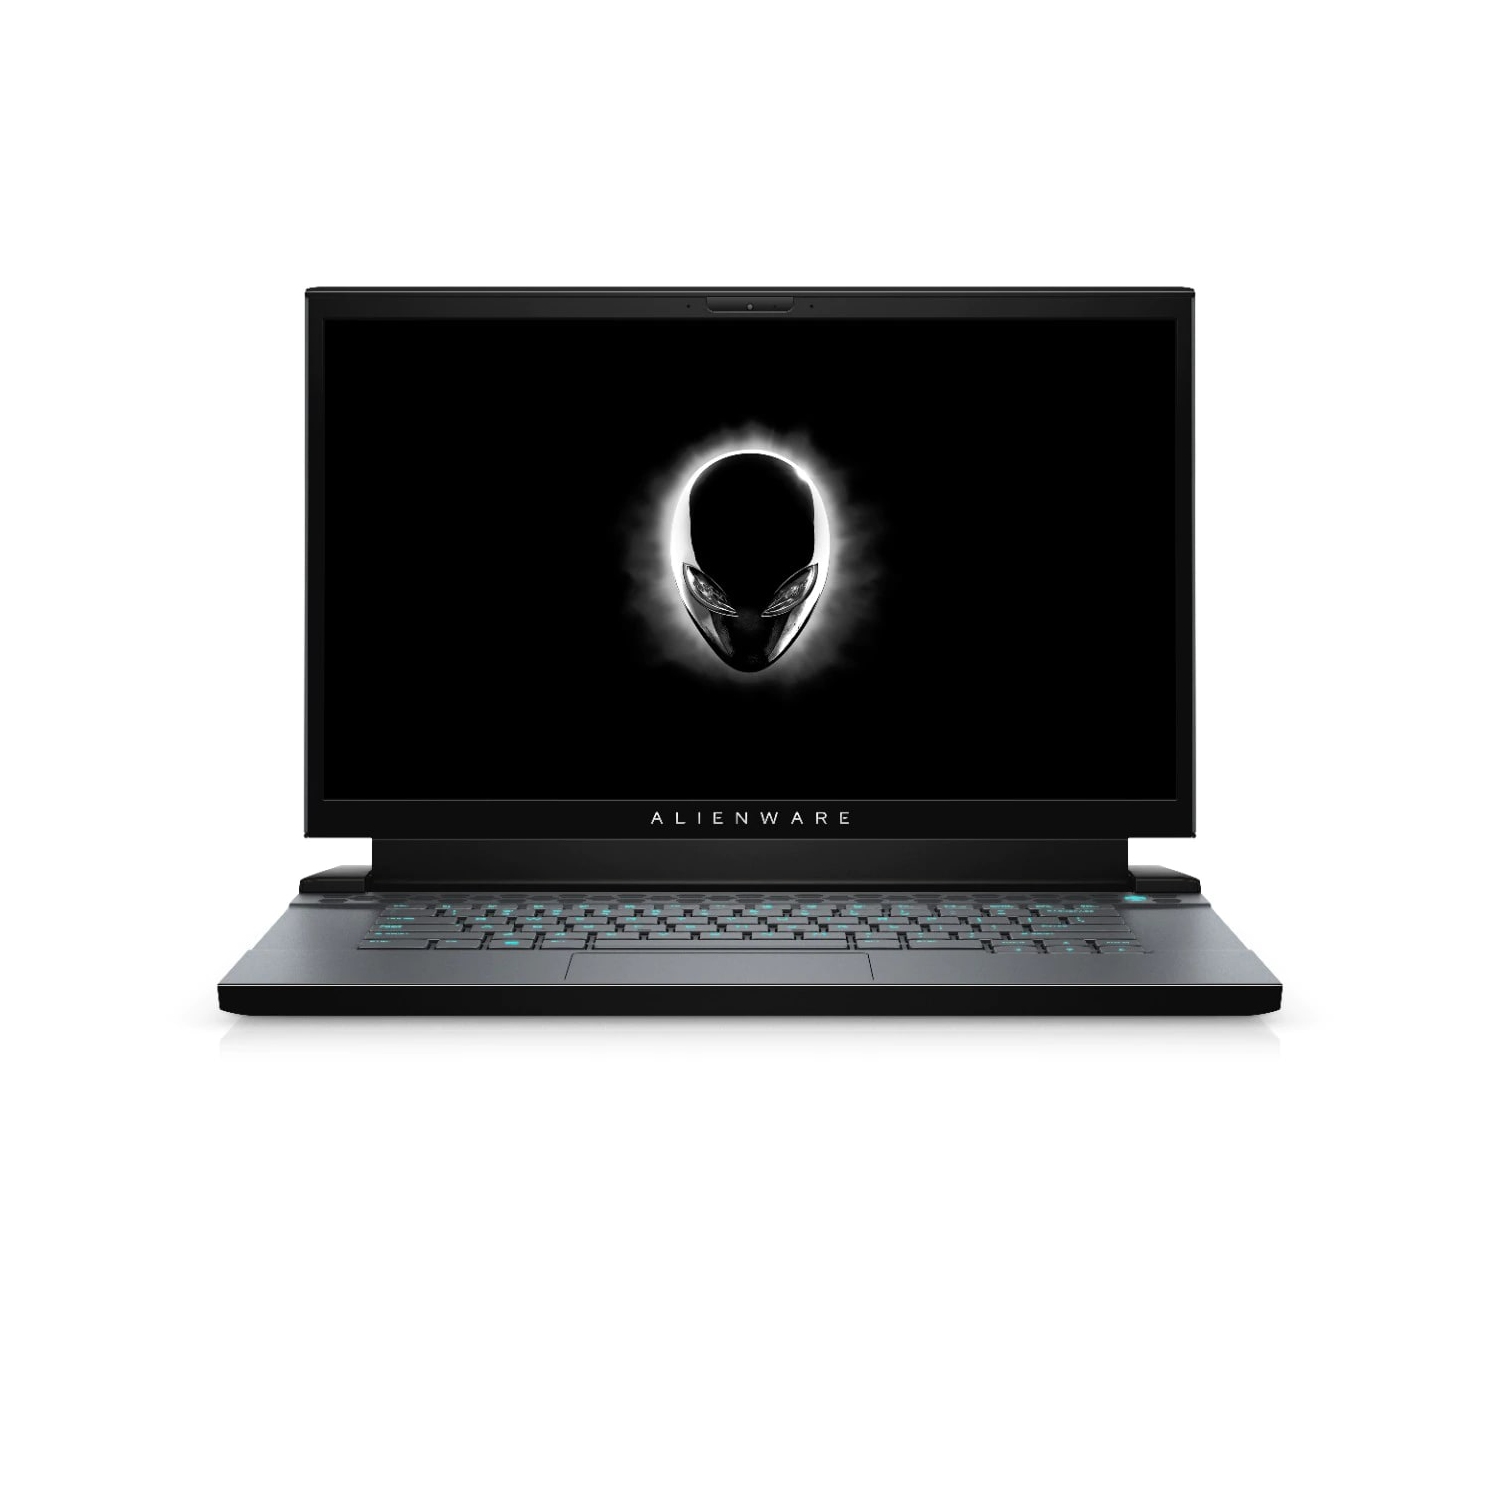 Refurbished (Excellent) - Dell Alienware m15 R2 Gaming Laptop (2019), 15.6" FHD, Core i7, 256GB SSD + 256GB SSD, 16GB RAM, RTX 2060, 6 Cores @ 4.5 GHz Certified